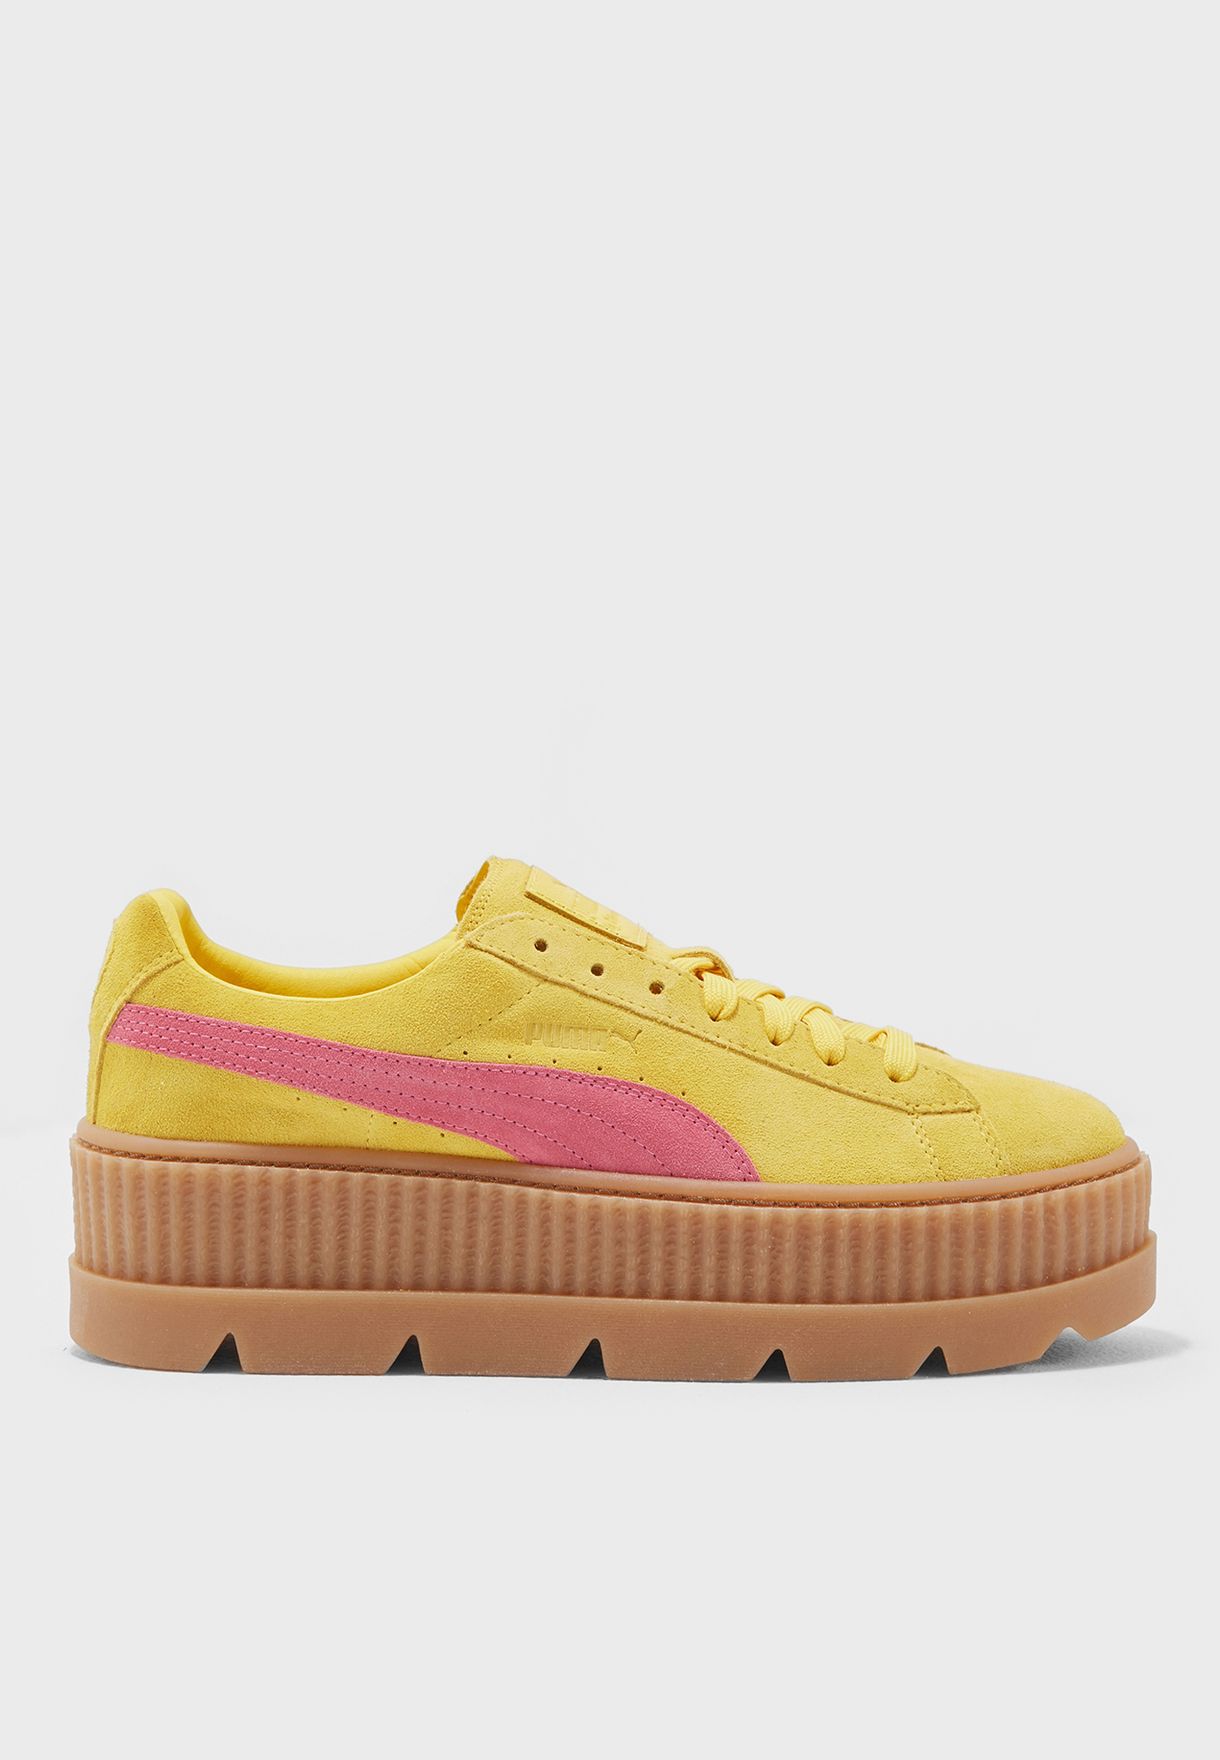 yellow and pink puma creepers